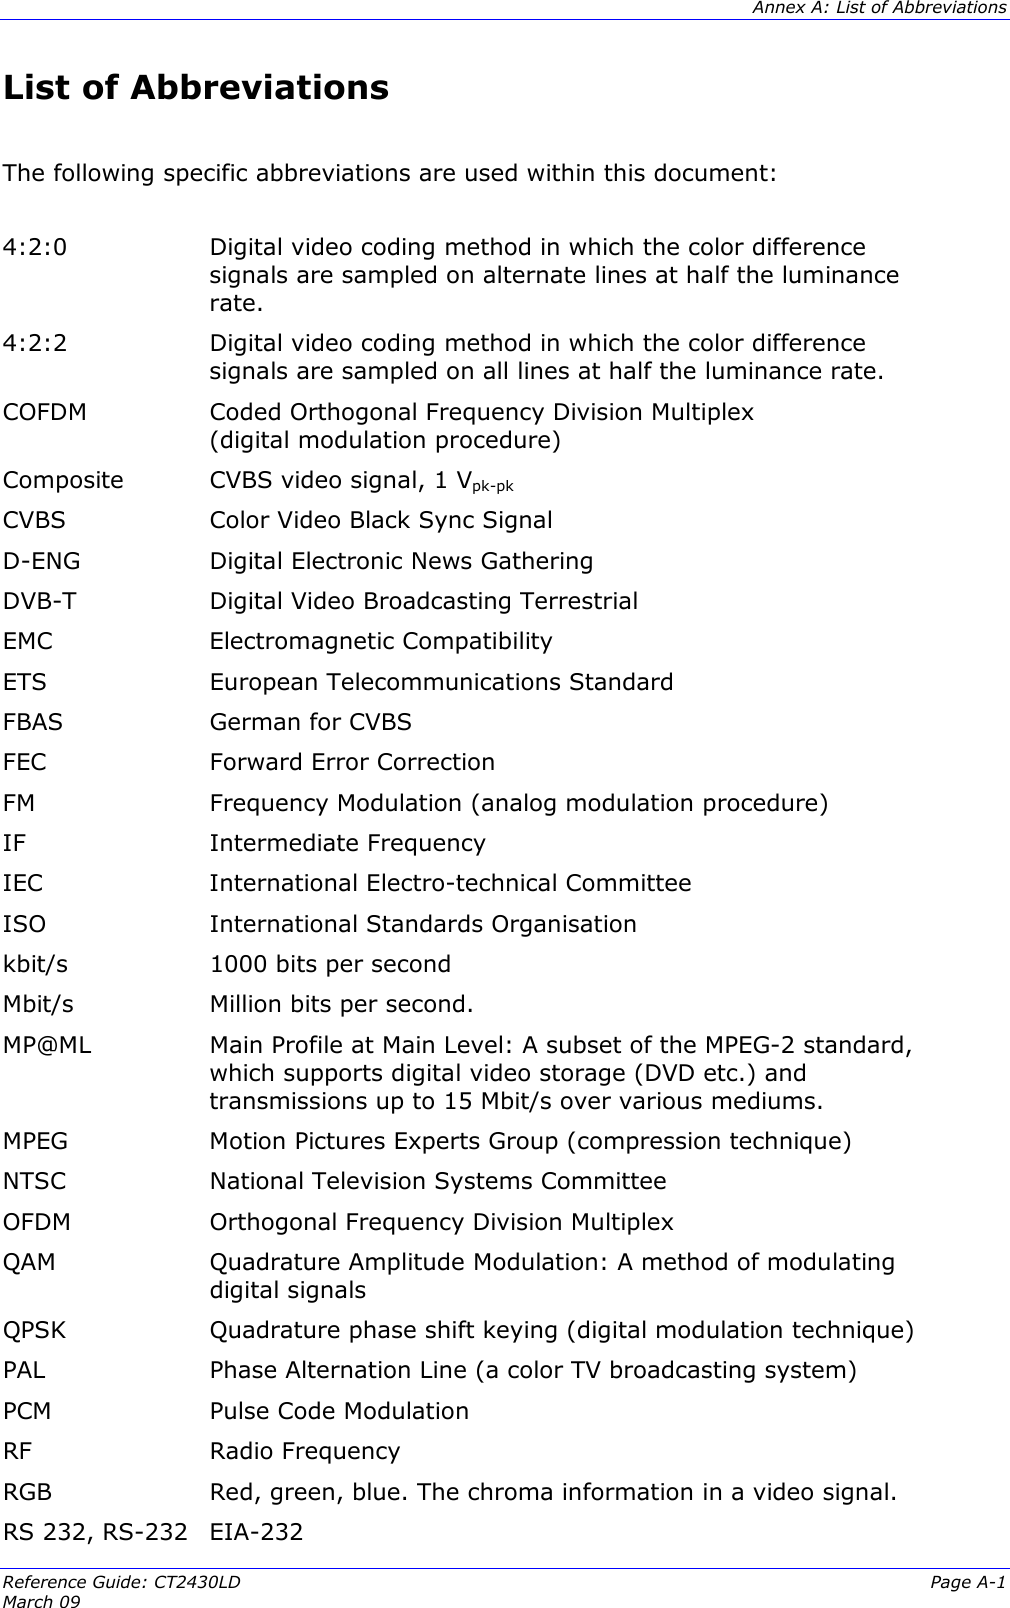  Annex A: List of Abbreviations Reference Guide: CT2430LD  Page A-1 March 09   List of Abbreviations  The following specific abbreviations are used within this document:   4:2:0  Digital video coding method in which the color difference signals are sampled on alternate lines at half the luminance rate. 4:2:2  Digital video coding method in which the color difference signals are sampled on all lines at half the luminance rate. COFDM  Coded Orthogonal Frequency Division Multiplex  (digital modulation procedure) Composite  CVBS video signal, 1 Vpk-pk CVBS  Color Video Black Sync Signal D-ENG  Digital Electronic News Gathering DVB-T  Digital Video Broadcasting Terrestrial EMC   Electromagnetic Compatibility ETS  European Telecommunications Standard FBAS  German for CVBS FEC  Forward Error Correction FM  Frequency Modulation (analog modulation procedure) IF  Intermediate Frequency IEC  International Electro-technical Committee ISO  International Standards Organisation kbit/s   1000 bits per second Mbit/s  Million bits per second. MP@ML  Main Profile at Main Level: A subset of the MPEG-2 standard, which supports digital video storage (DVD etc.) and transmissions up to 15 Mbit/s over various mediums. MPEG  Motion Pictures Experts Group (compression technique)  NTSC  National Television Systems Committee OFDM   Orthogonal Frequency Division Multiplex QAM  Quadrature Amplitude Modulation: A method of modulating digital signals QPSK  Quadrature phase shift keying (digital modulation technique) PAL  Phase Alternation Line (a color TV broadcasting system) PCM  Pulse Code Modulation RF  Radio Frequency RGB  Red, green, blue. The chroma information in a video signal. RS 232, RS-232 EIA-232 